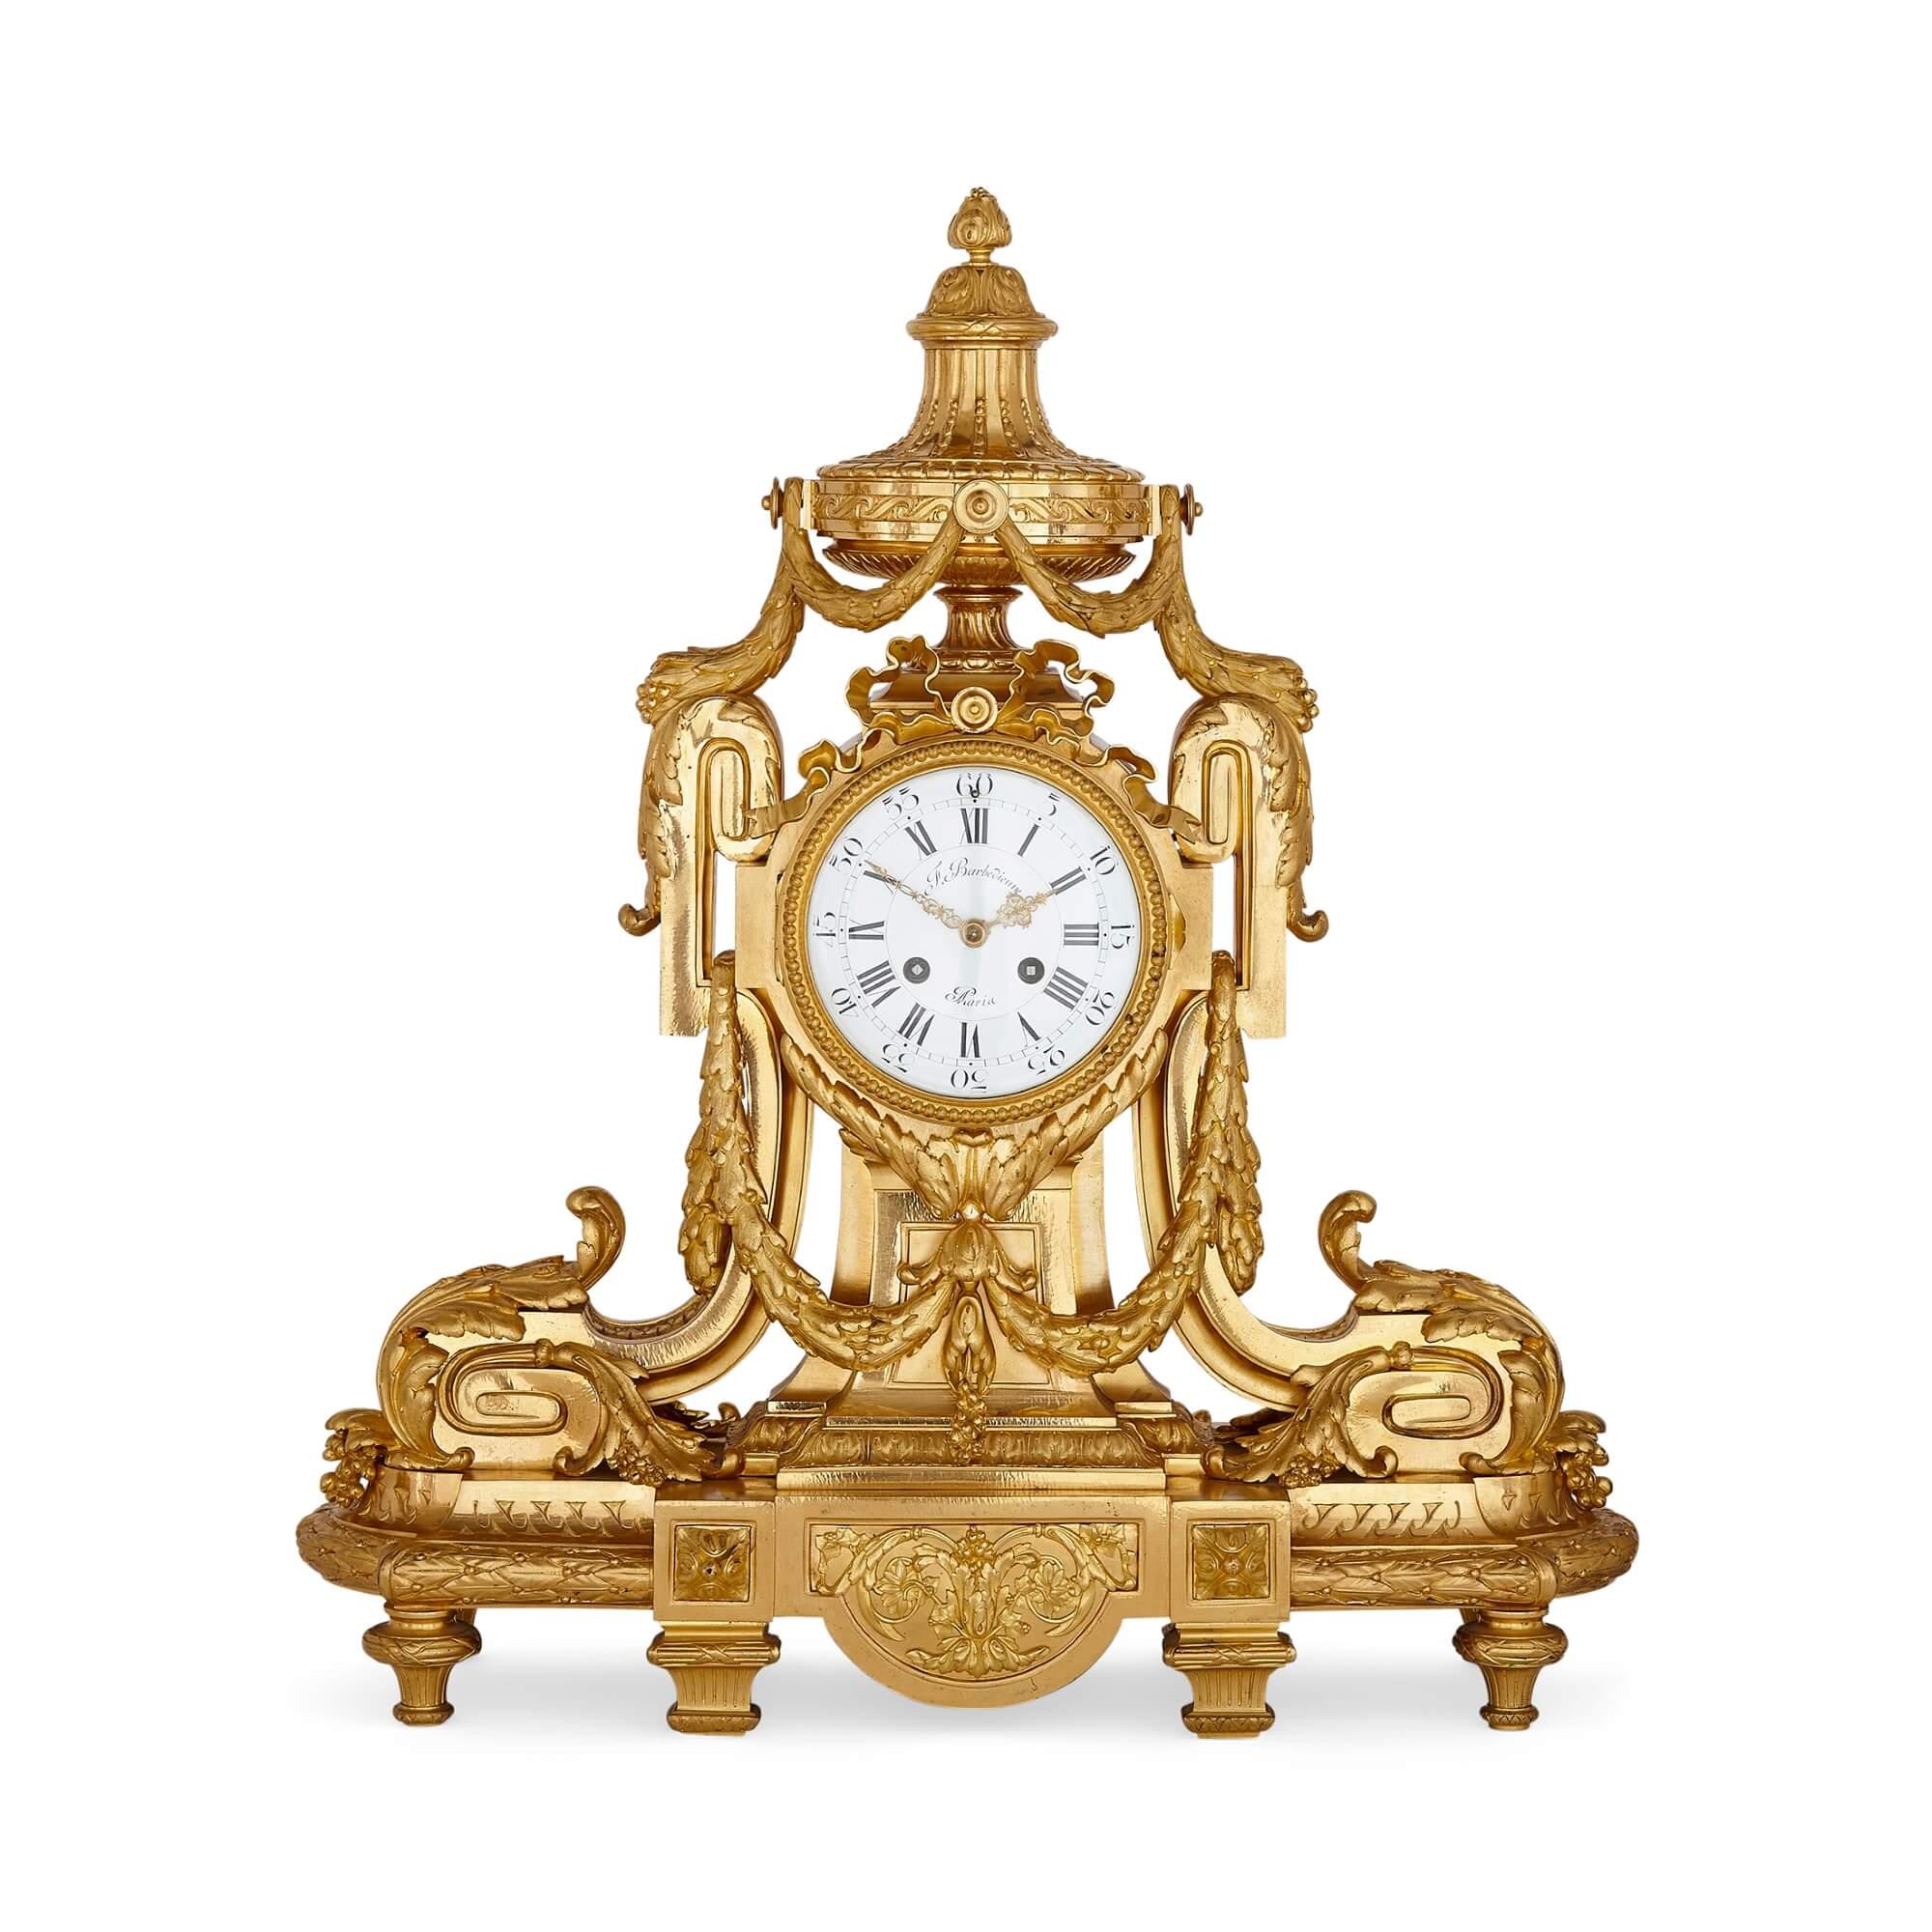 Large Louis XV style Rococo ormolu three-piece clock set by Barbedienne
French, late 19th century
Clock: height 58cm, width 51cm, depth 19cm
Candelabra: height 75cm, width 35cm, depth 28cm

Cast by Barbedienne, Ferdinand (French, 1810-1892),